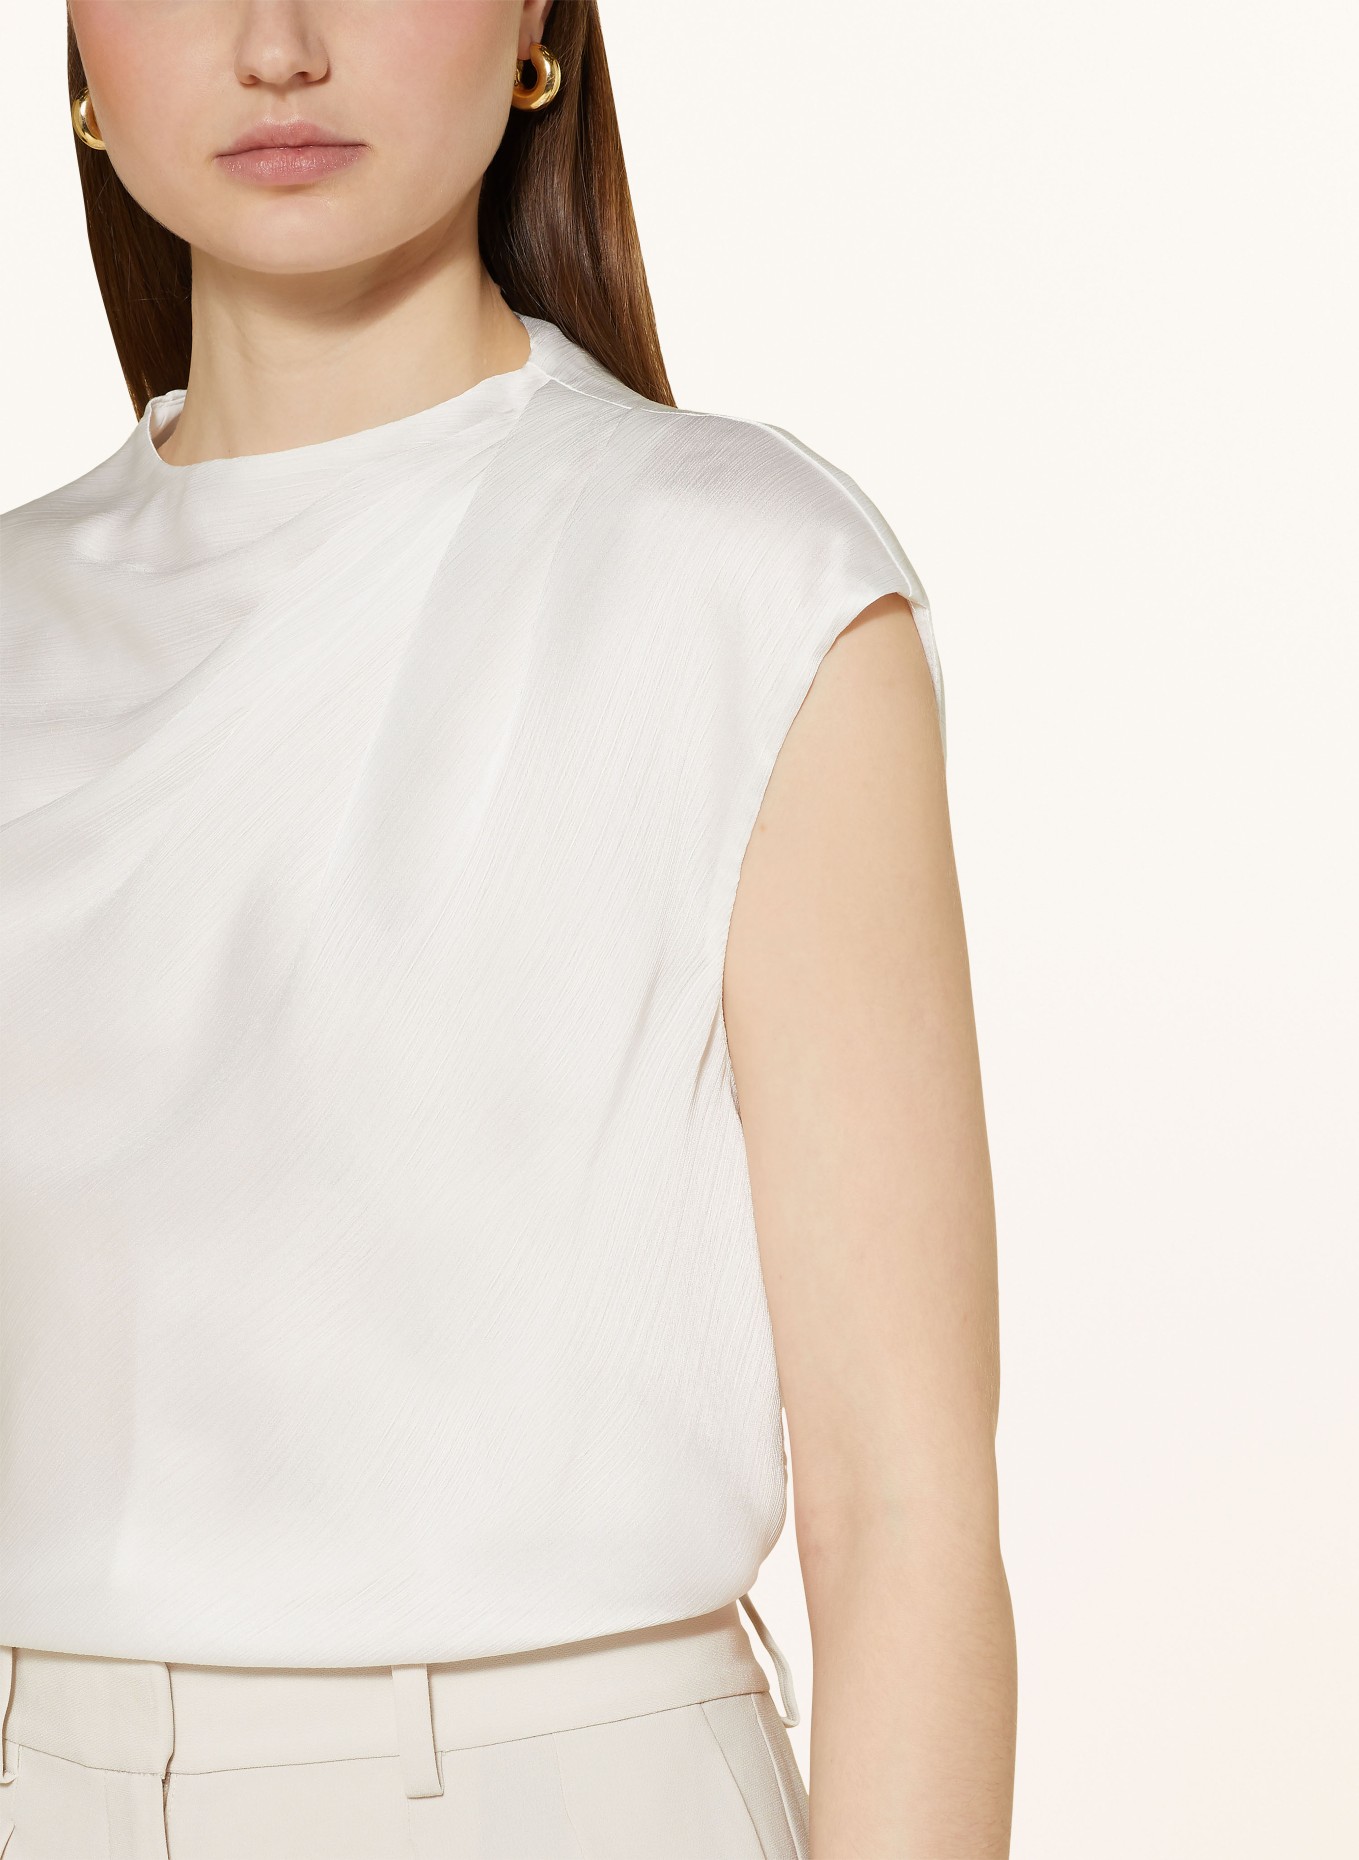 TED BAKER Blouse top MISRINA, Color: WHITE (Image 4)